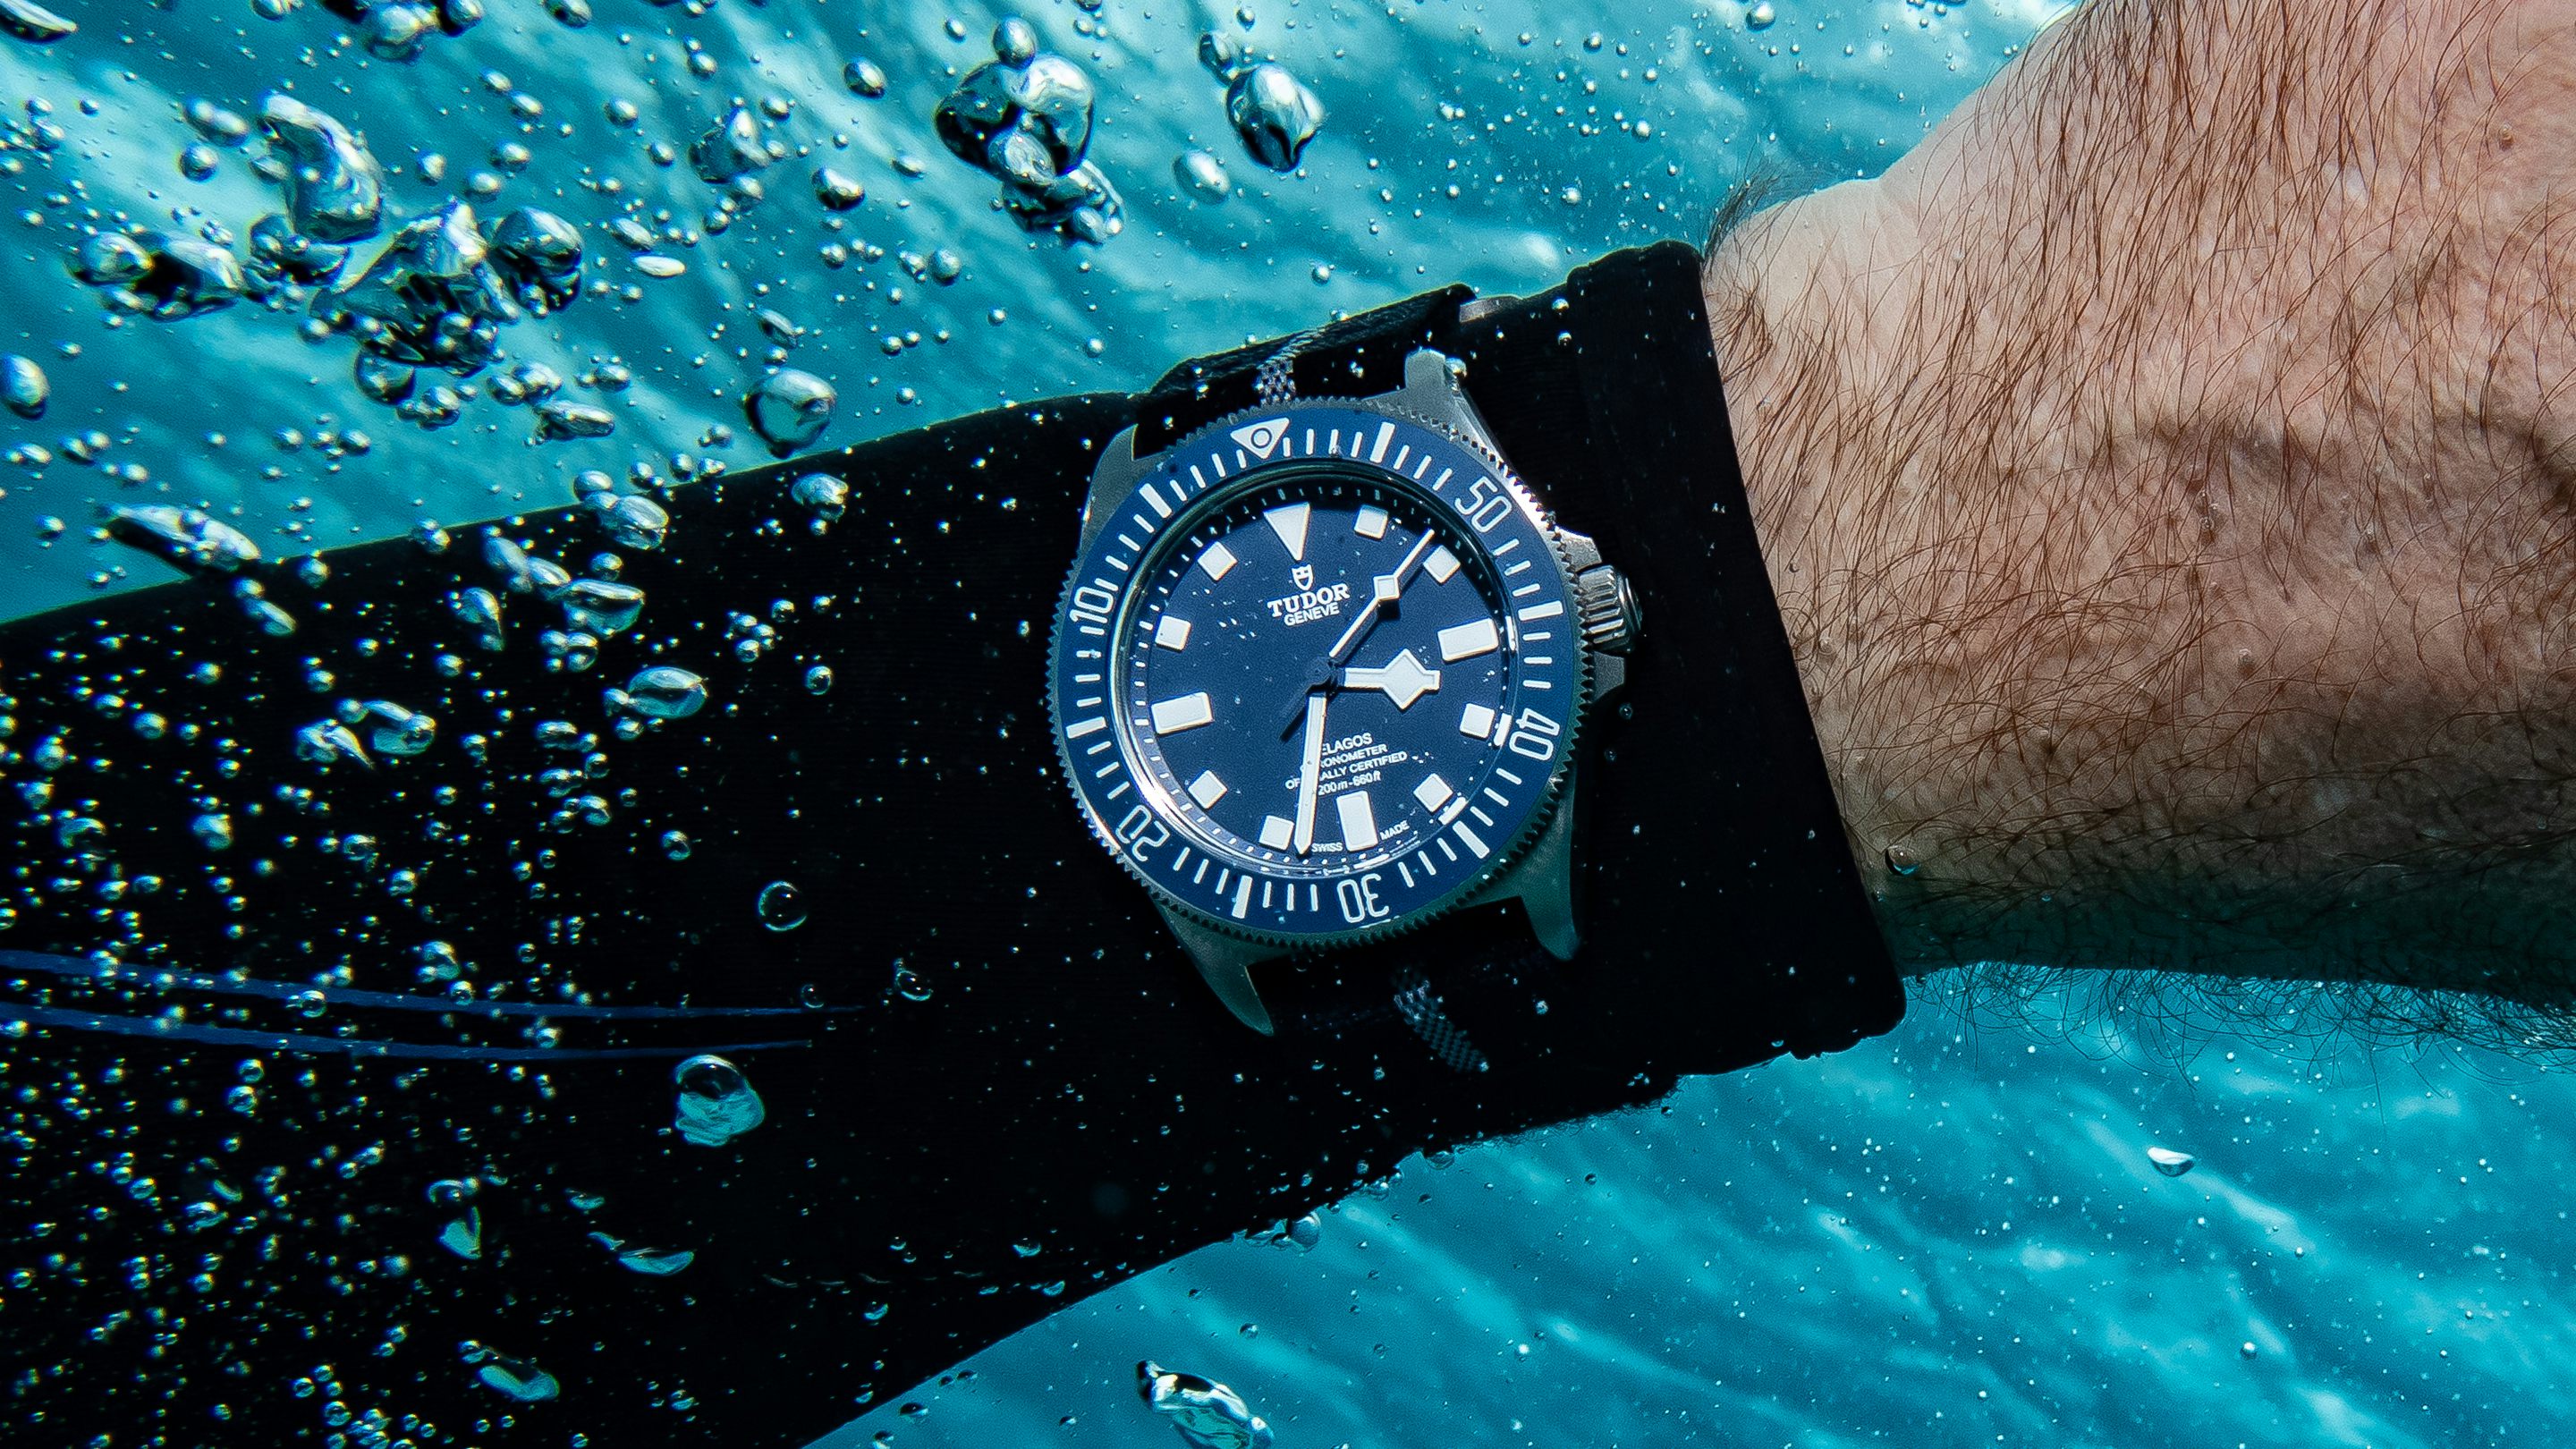 Diving With The New Tudor Pelagos FXD